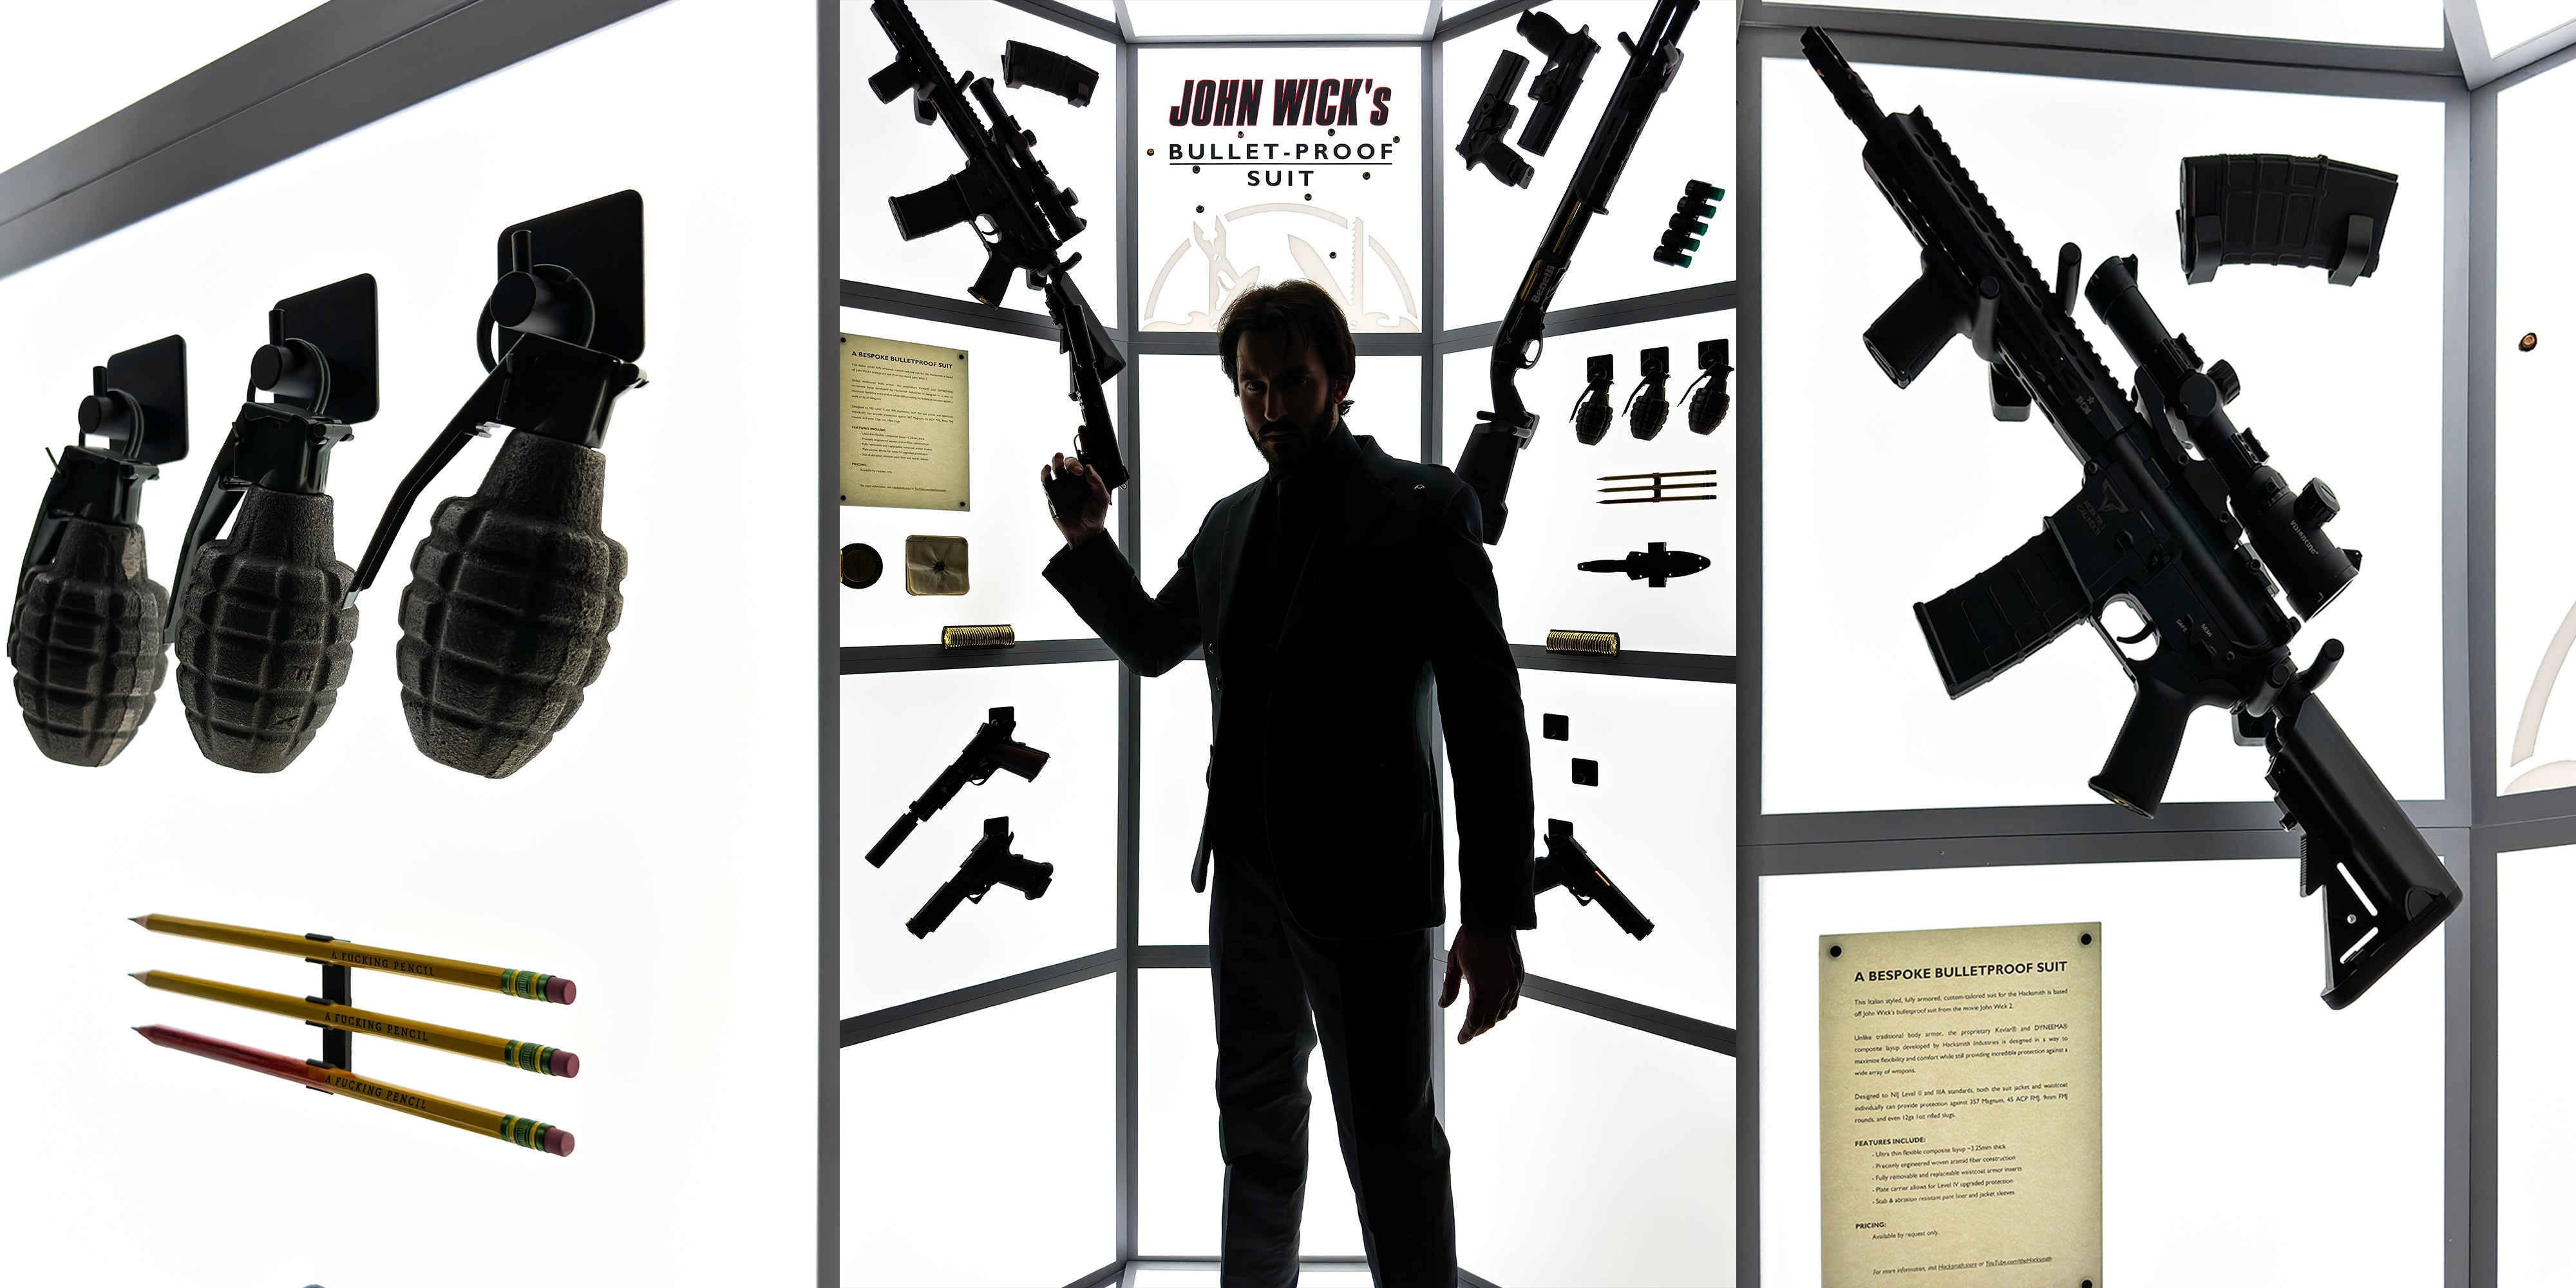 John Wick Video Collectibles